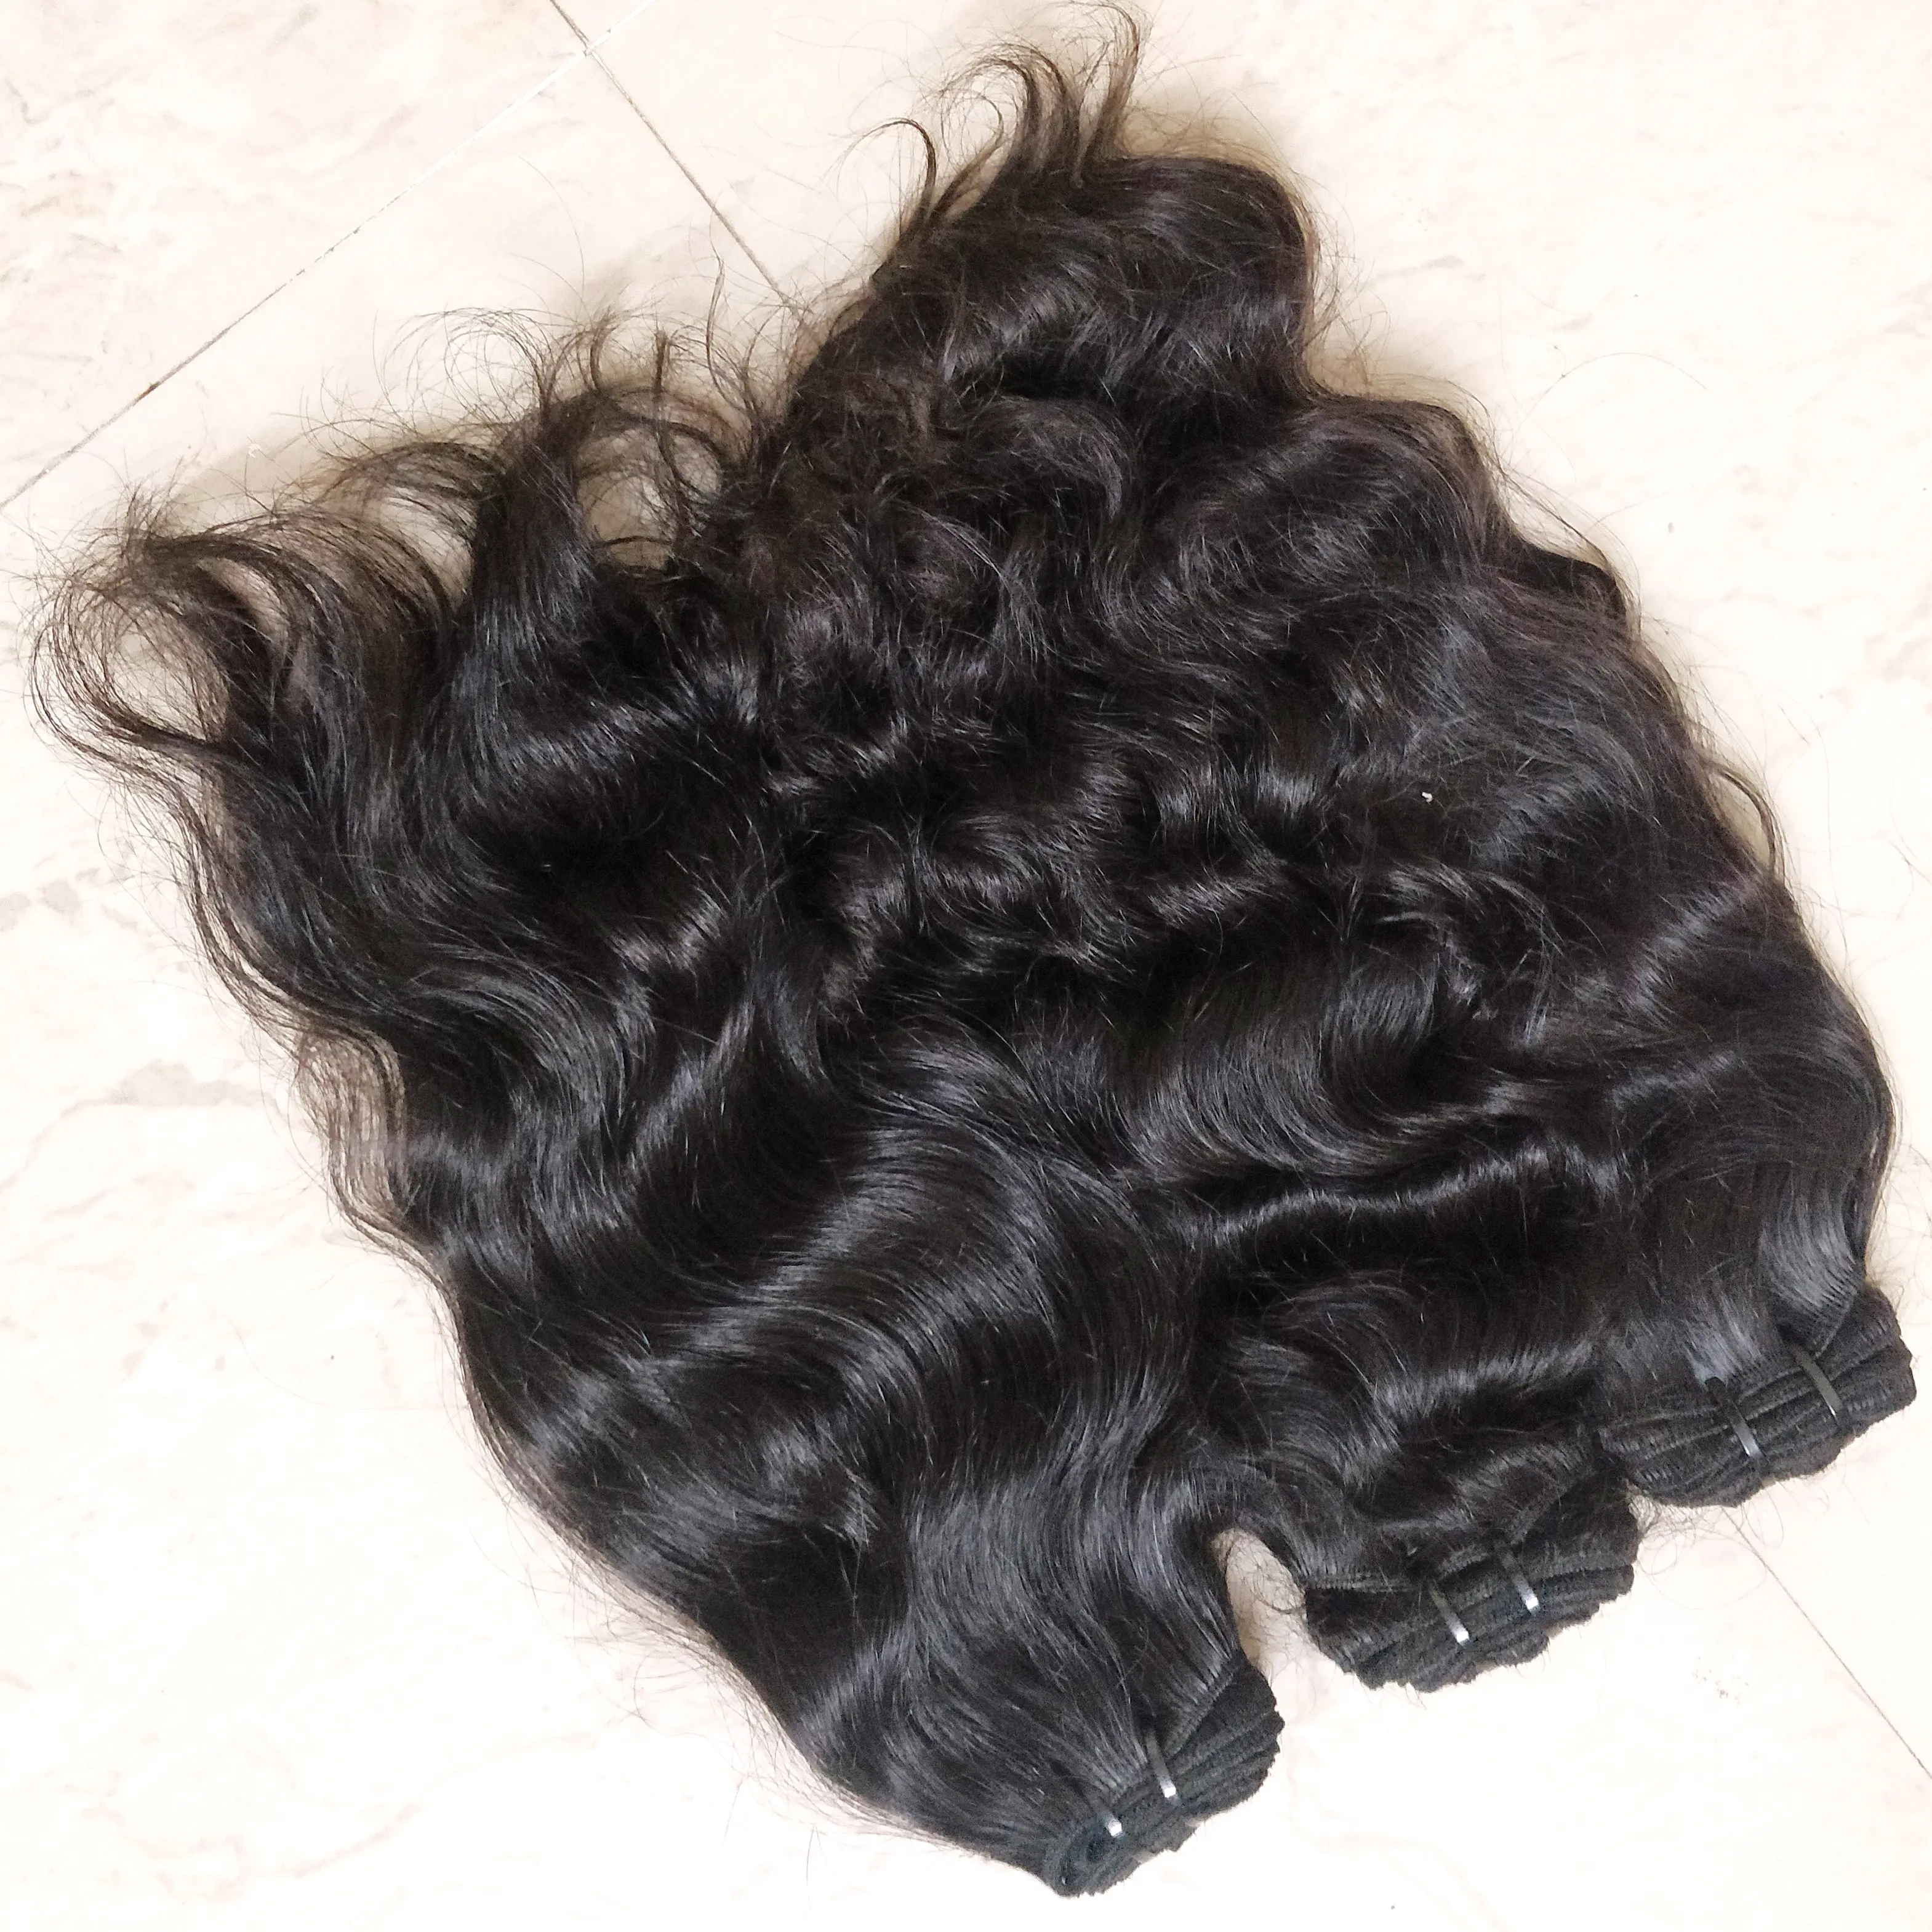 Double layer weft with 3 headed machinery hair extension 100% human hair from young and healthy donors